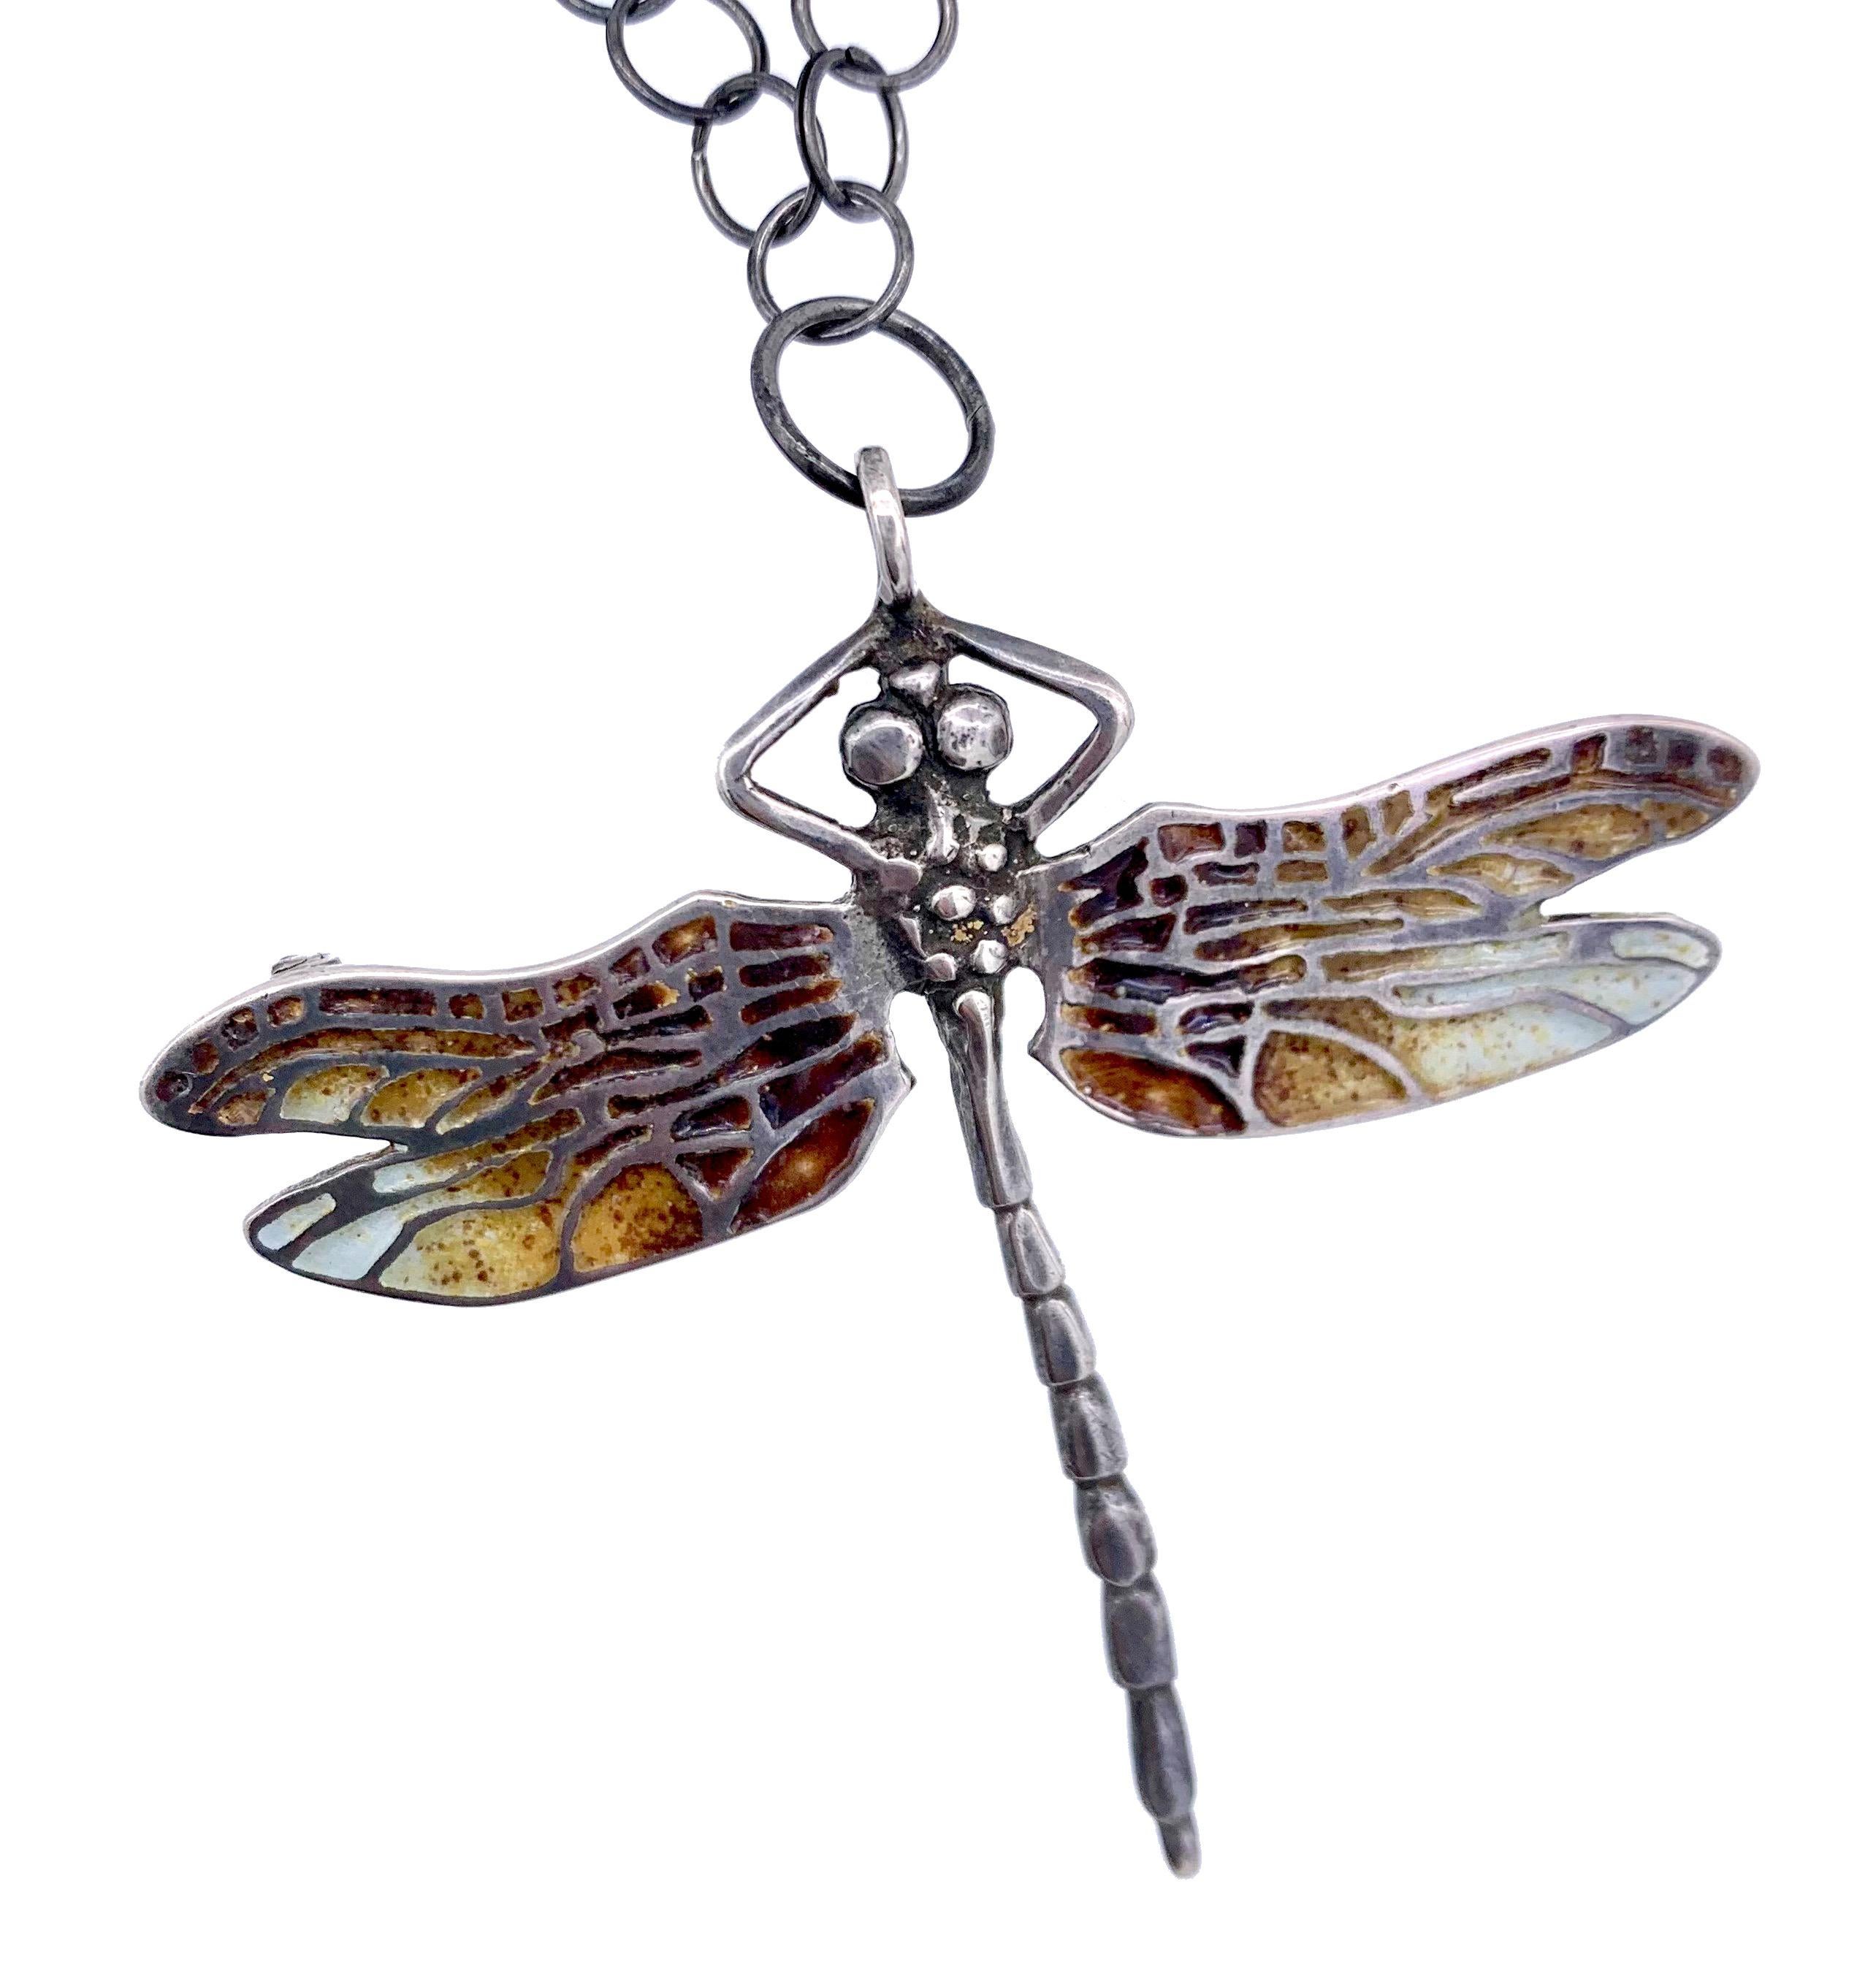 This wonderful antique long guard chain is made from extremely fine iron split rings. It came to me accompanied by an Art Nouveau style sterling silver dragonfly, painted with different hues of enamel.